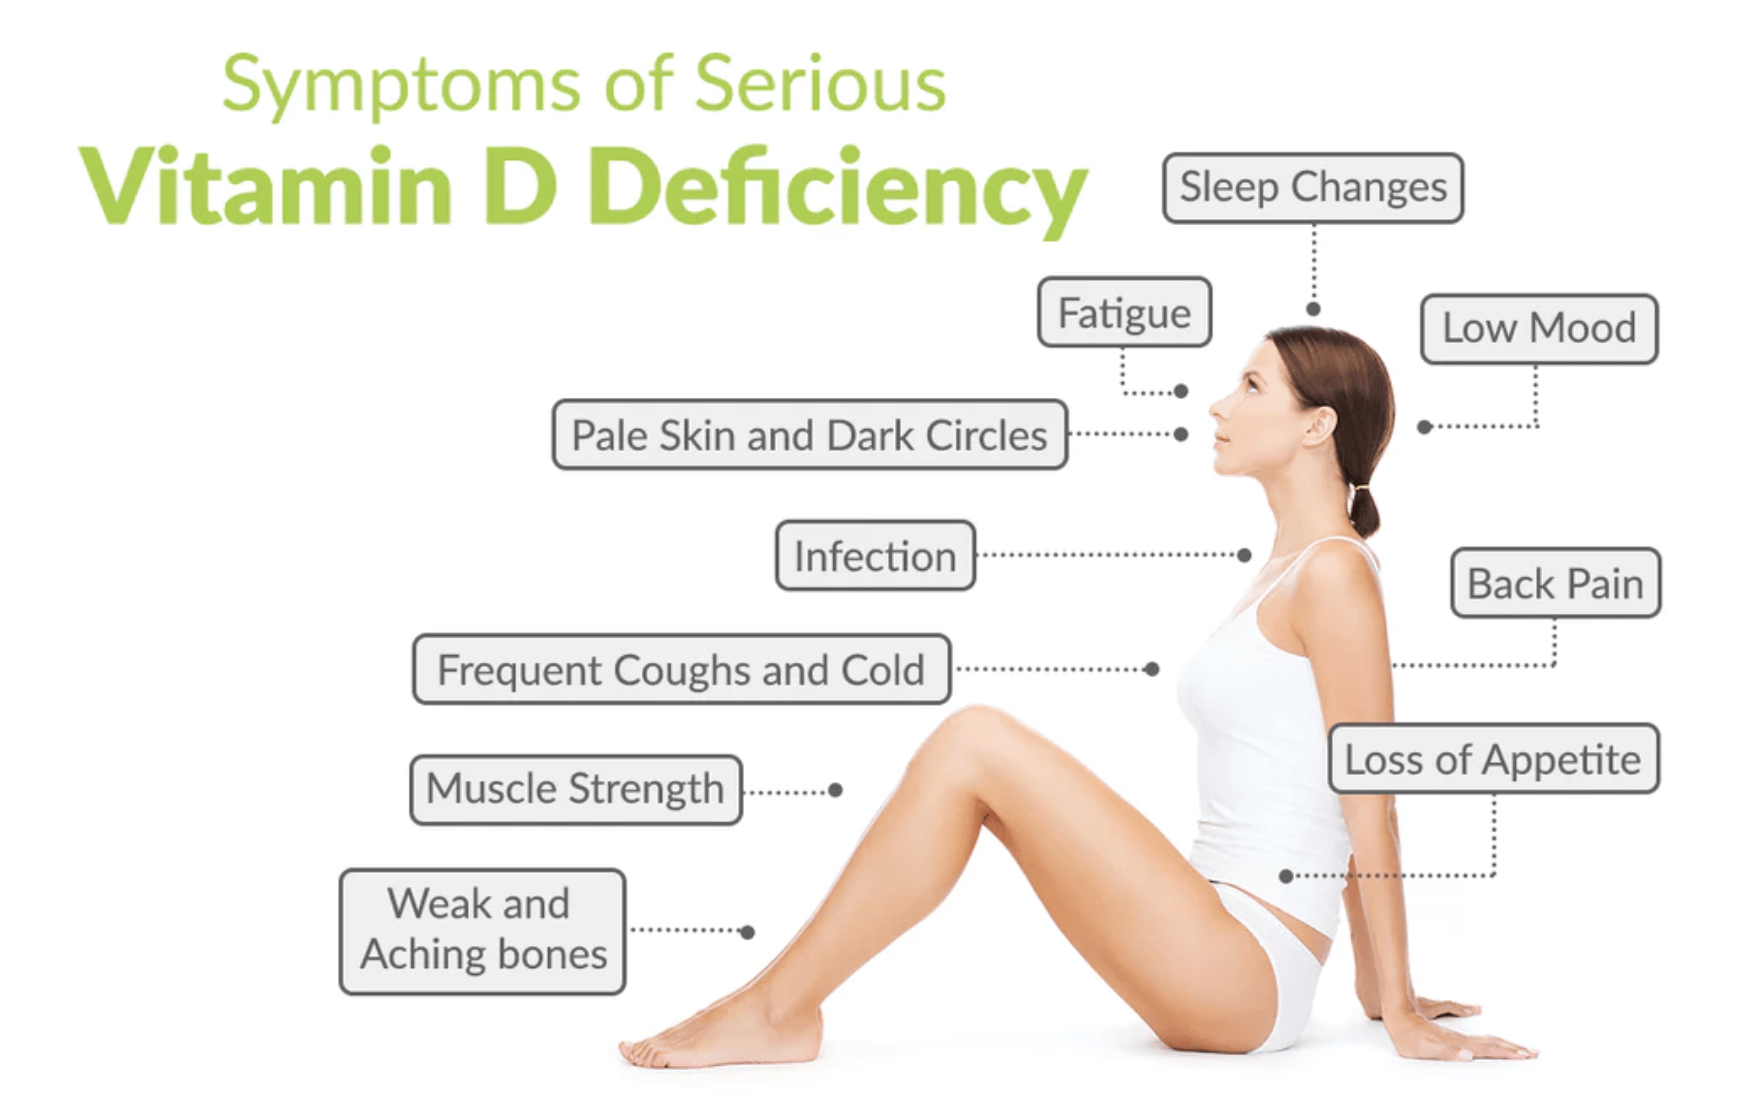 Graphic depicting the Symptoms of Serious Vitamin D Deficiency